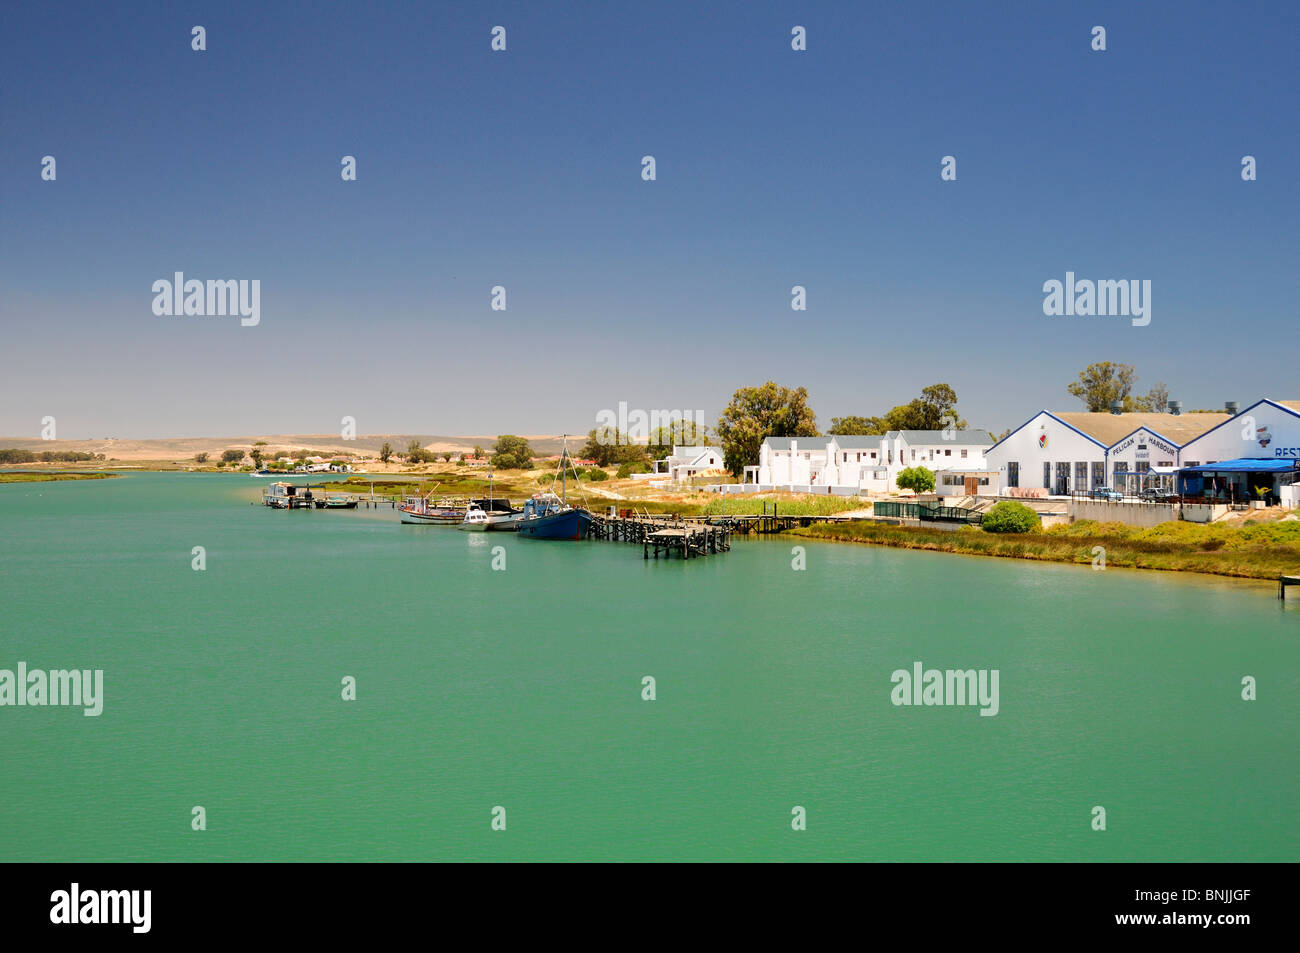 view from Bridge inlet at Velddrif Western Cape South Africa landscape water houses coast boats Stock Photo